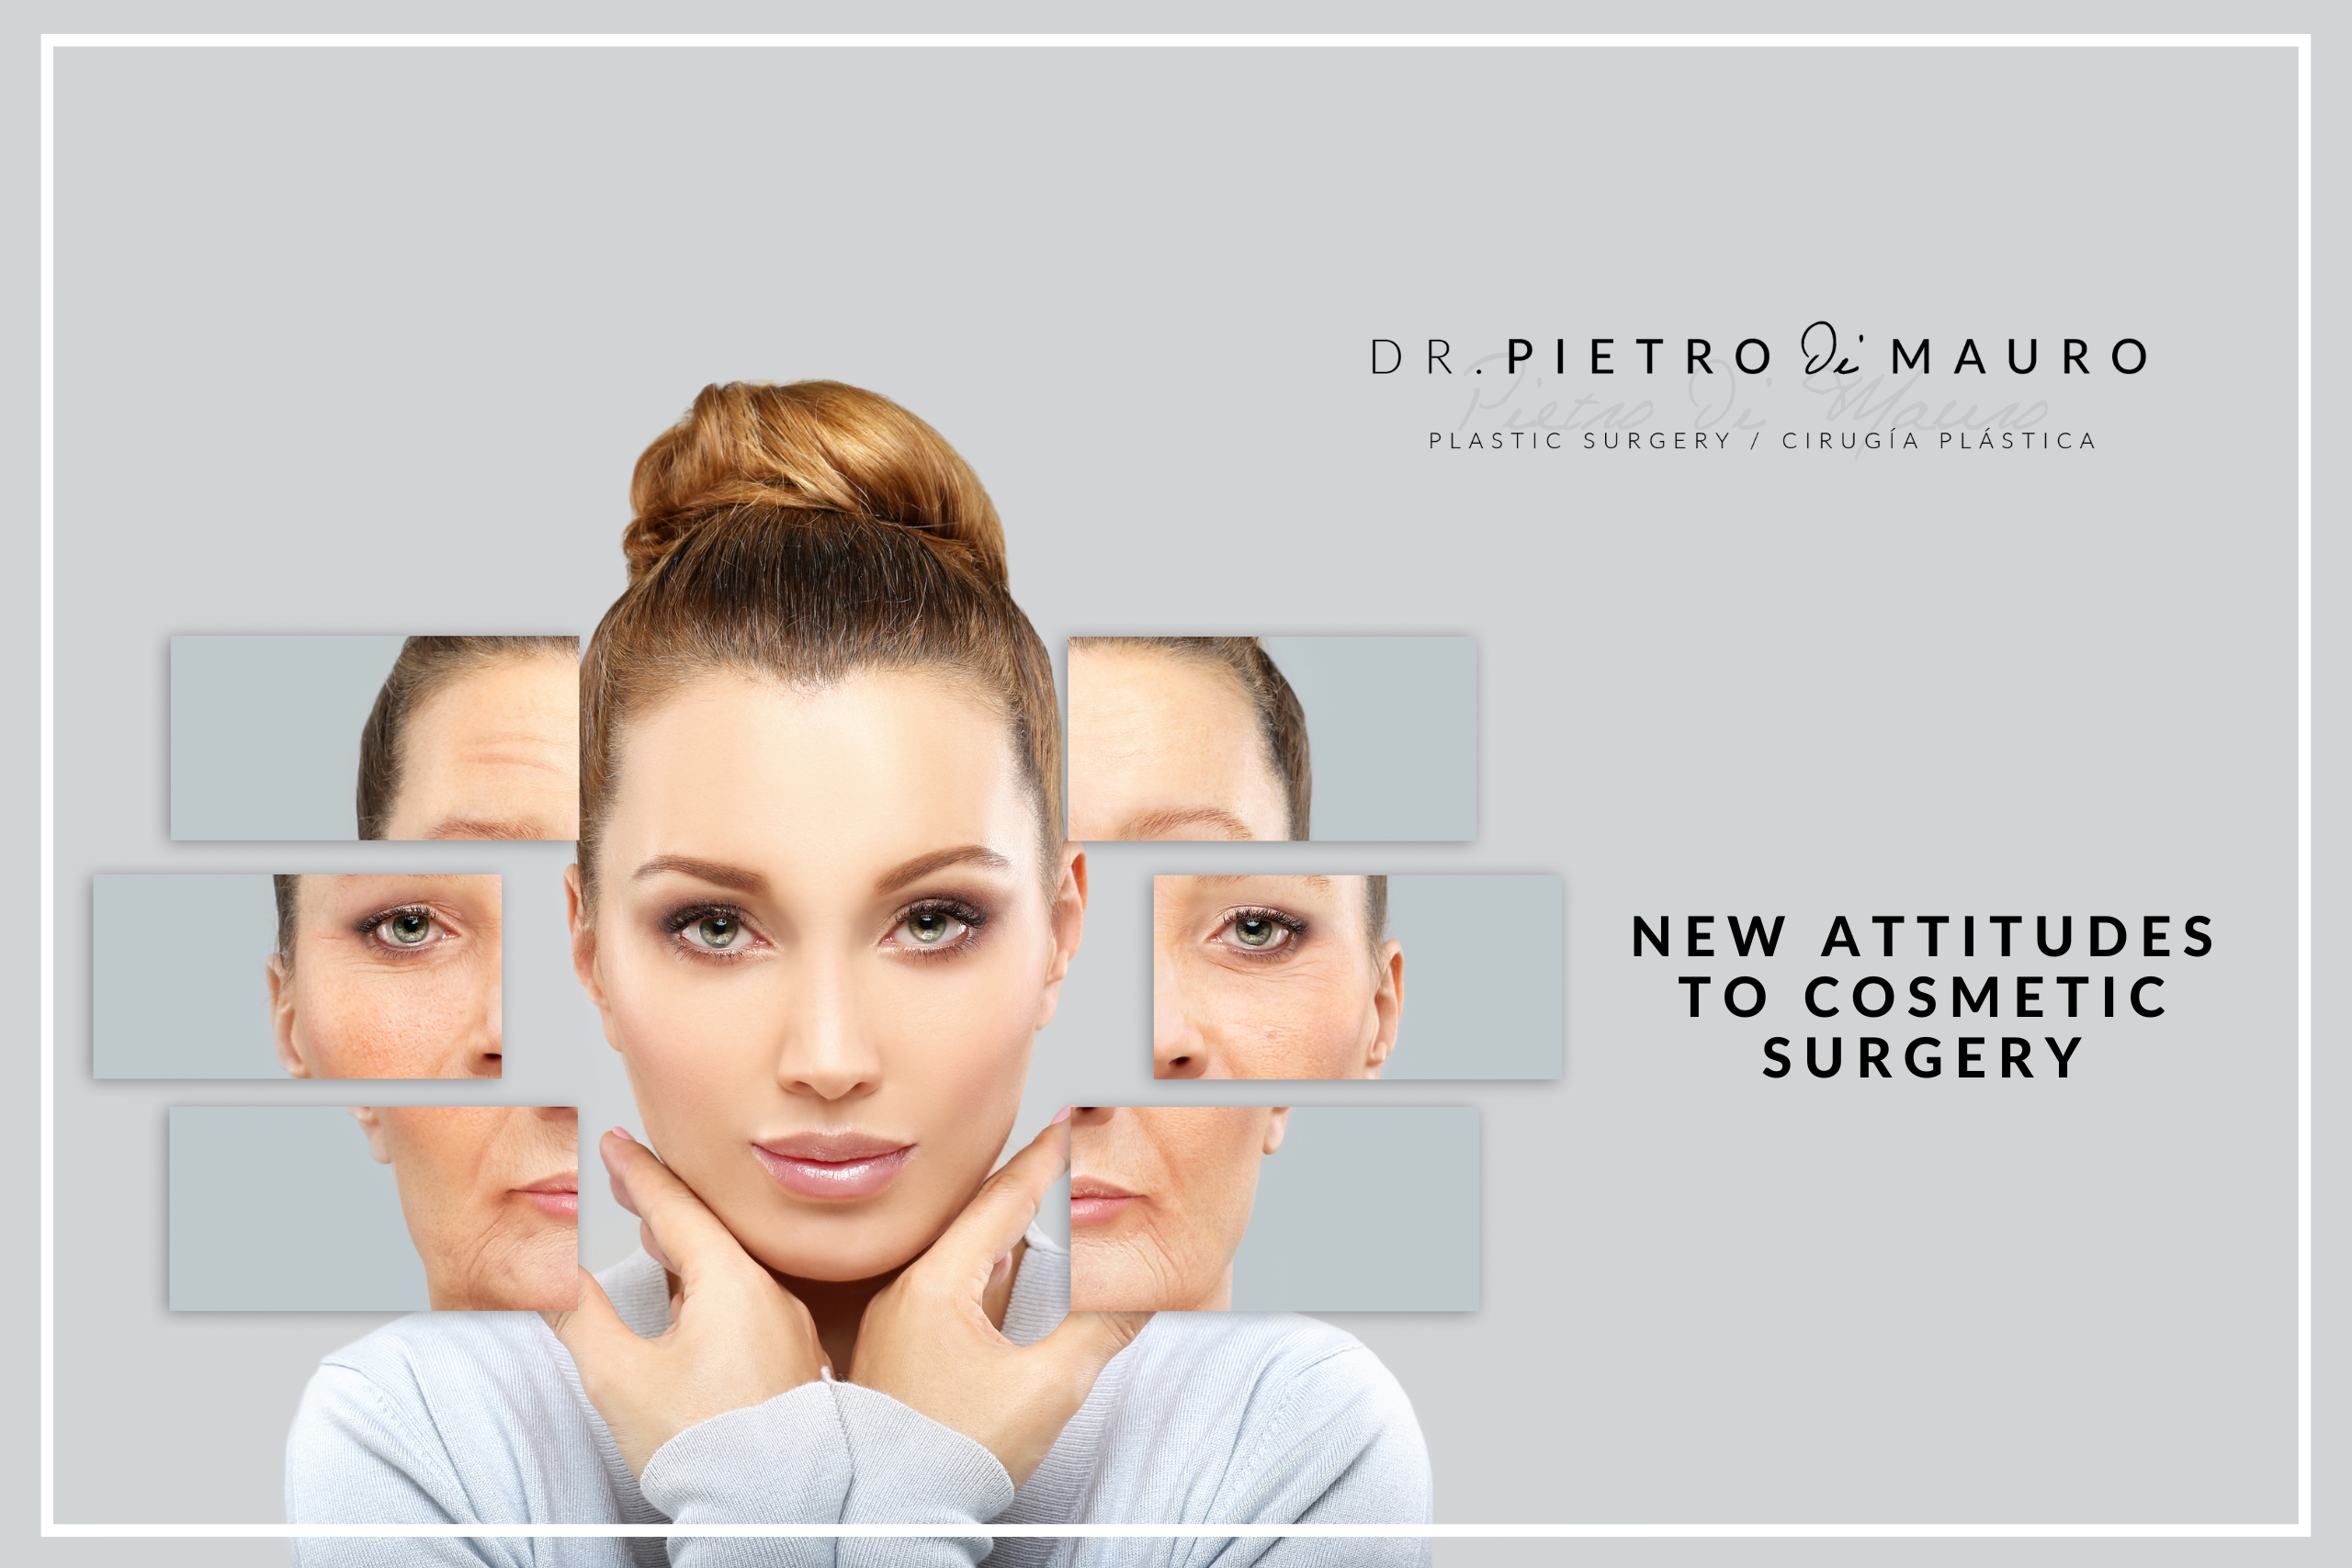 New attitudes to Cosmetic Surgery